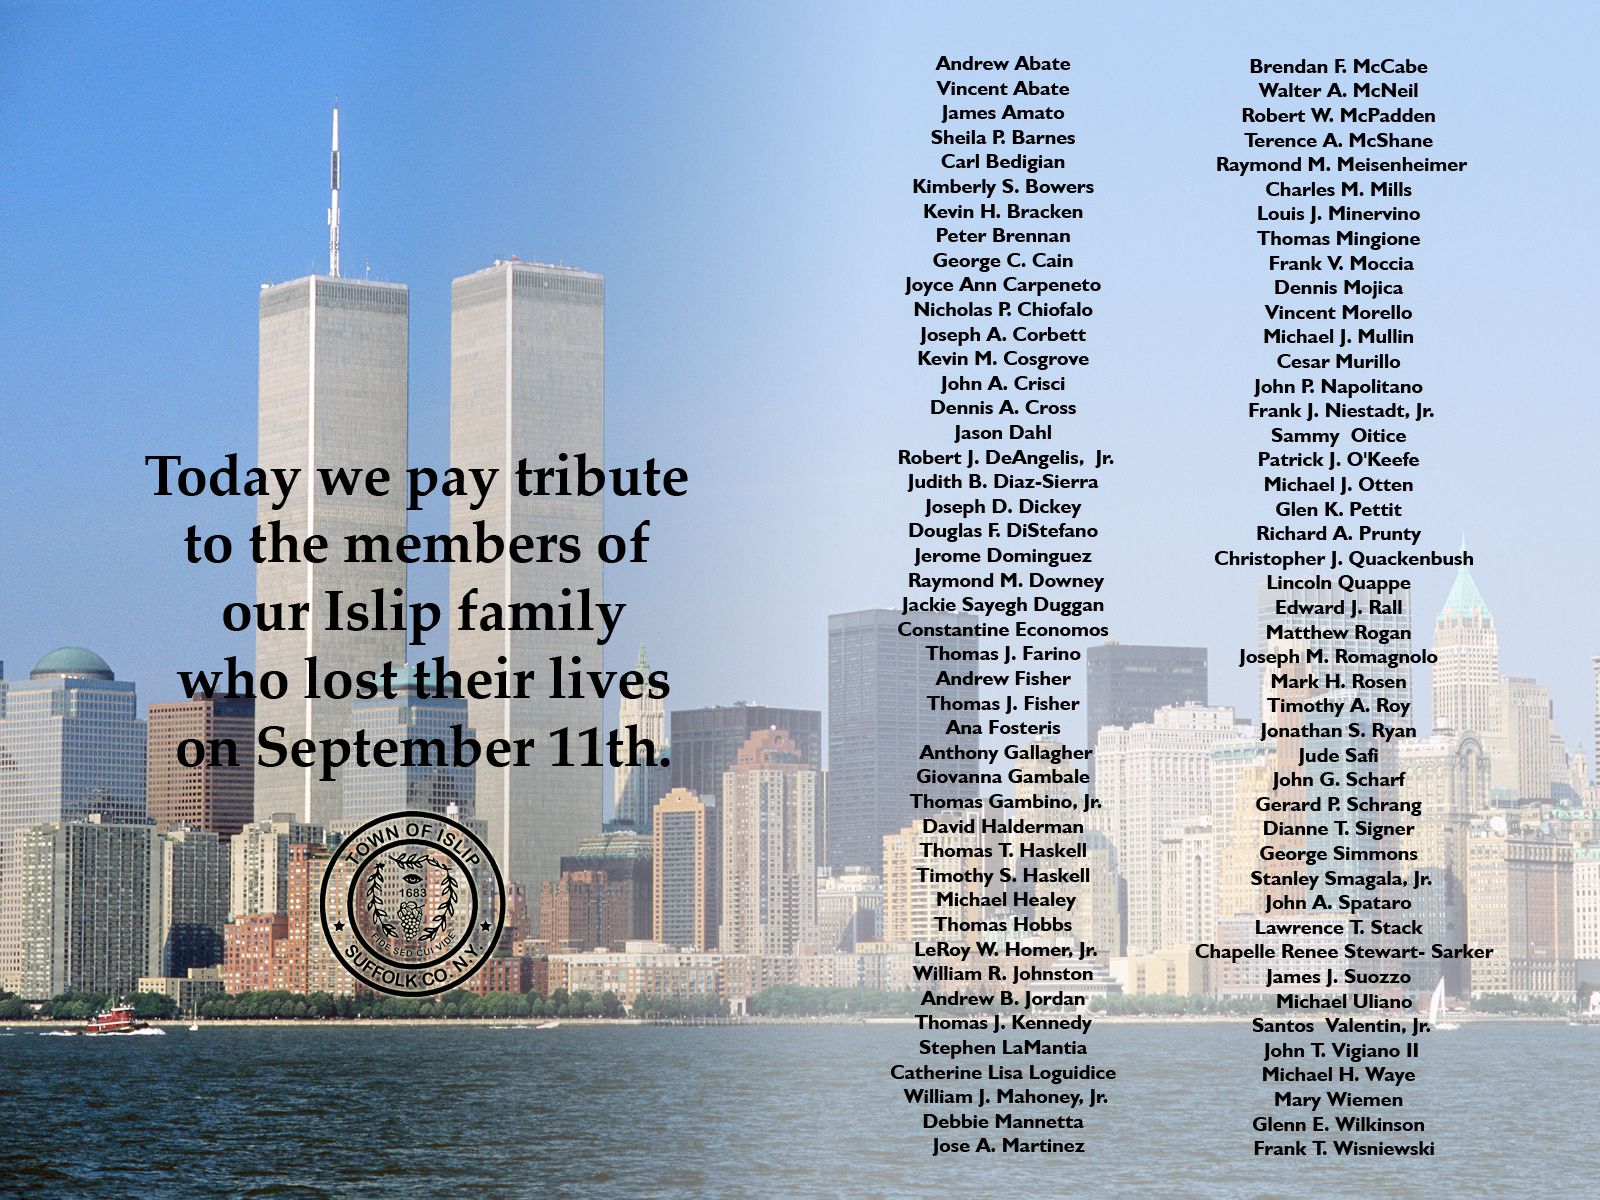 Rembrance picture of the Twin Towers and All Islip residents who were lost in the tragedy.